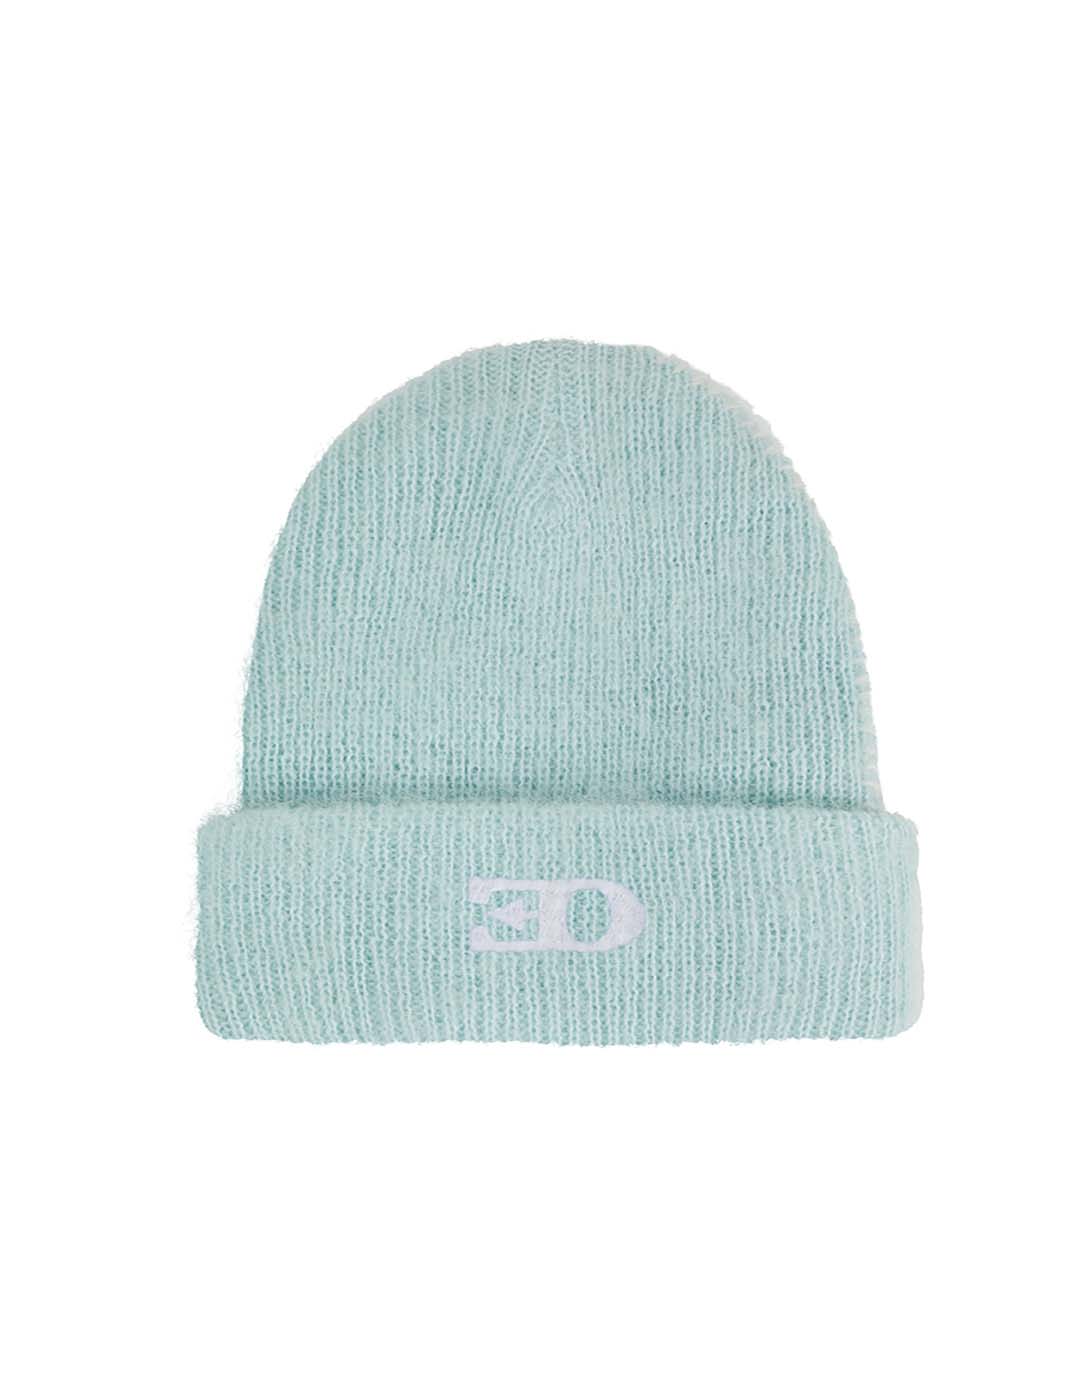 THE BEANIE IN LIGHT TURQUOISE MOHAIR